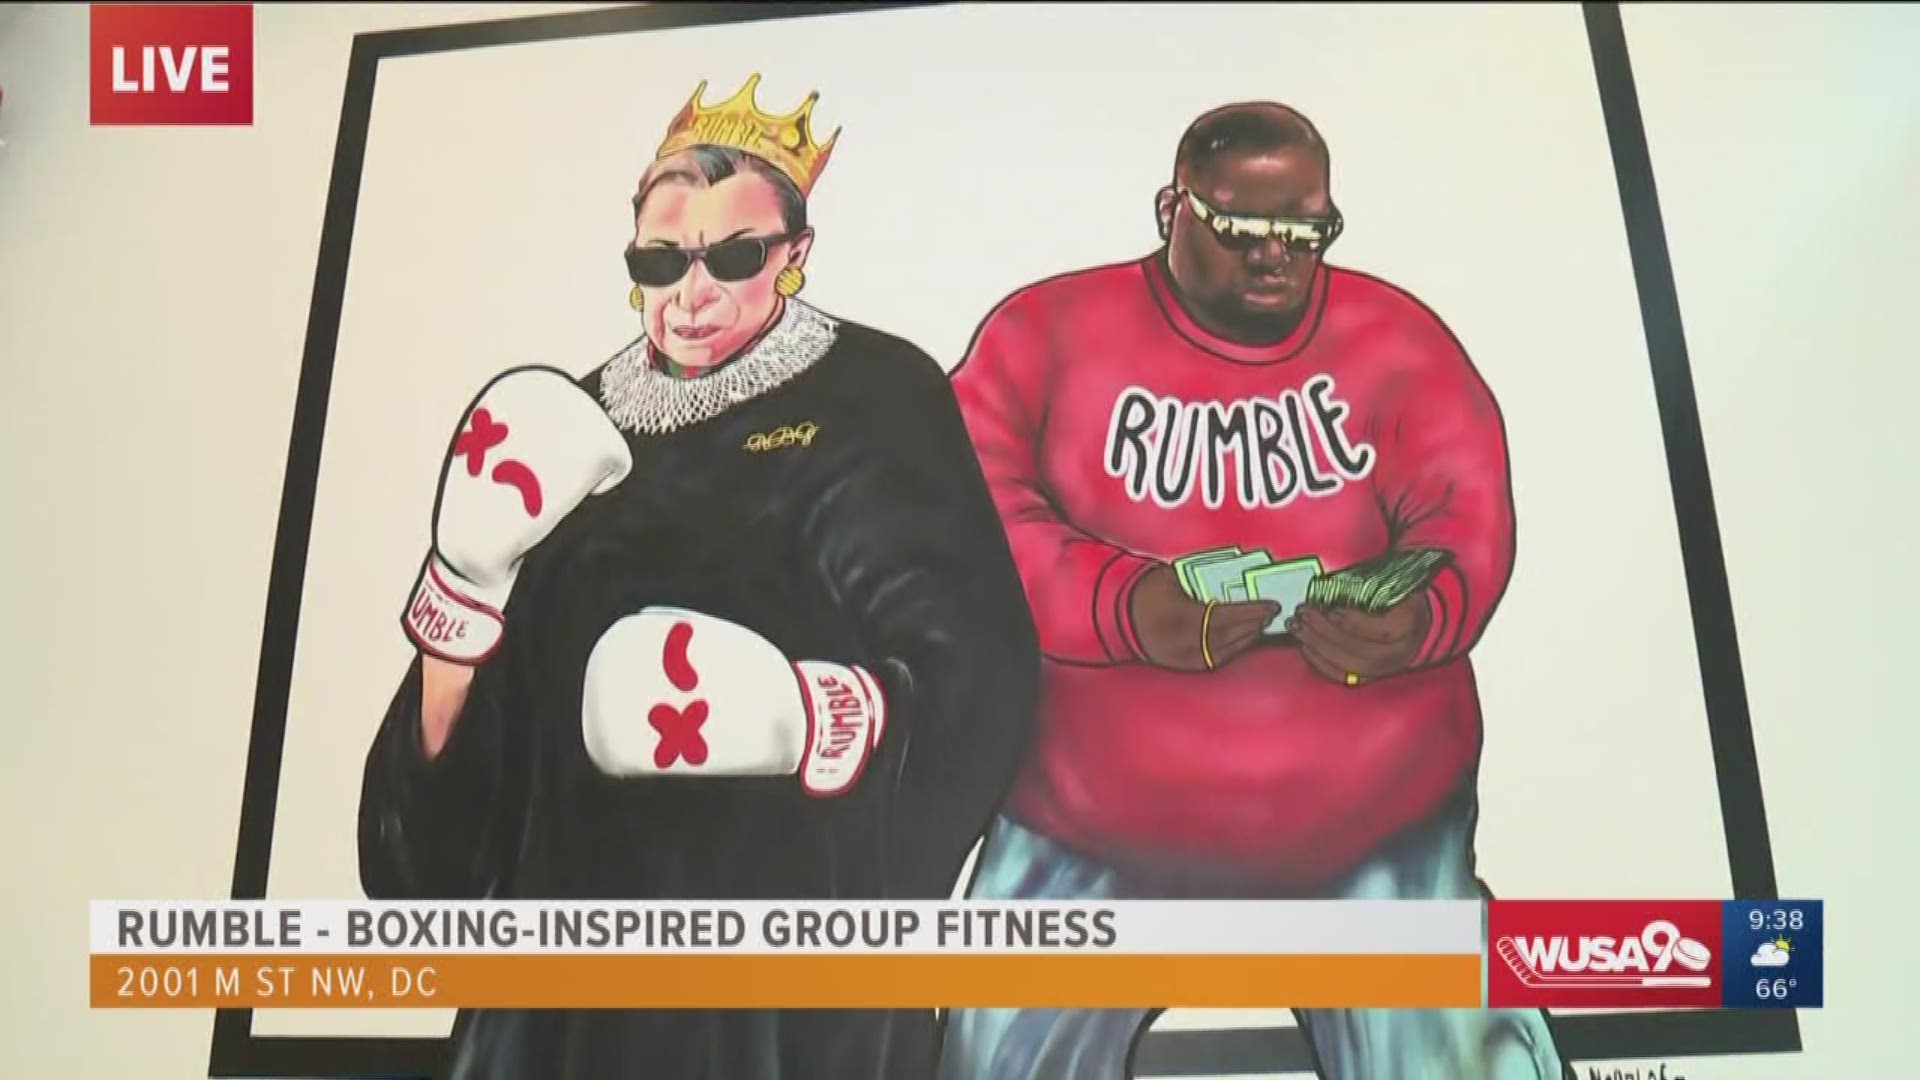 Rumble Boxing DC has their own fun and artistic take on fitness studio decor. When you stop by make sure to get a picture for the gram!